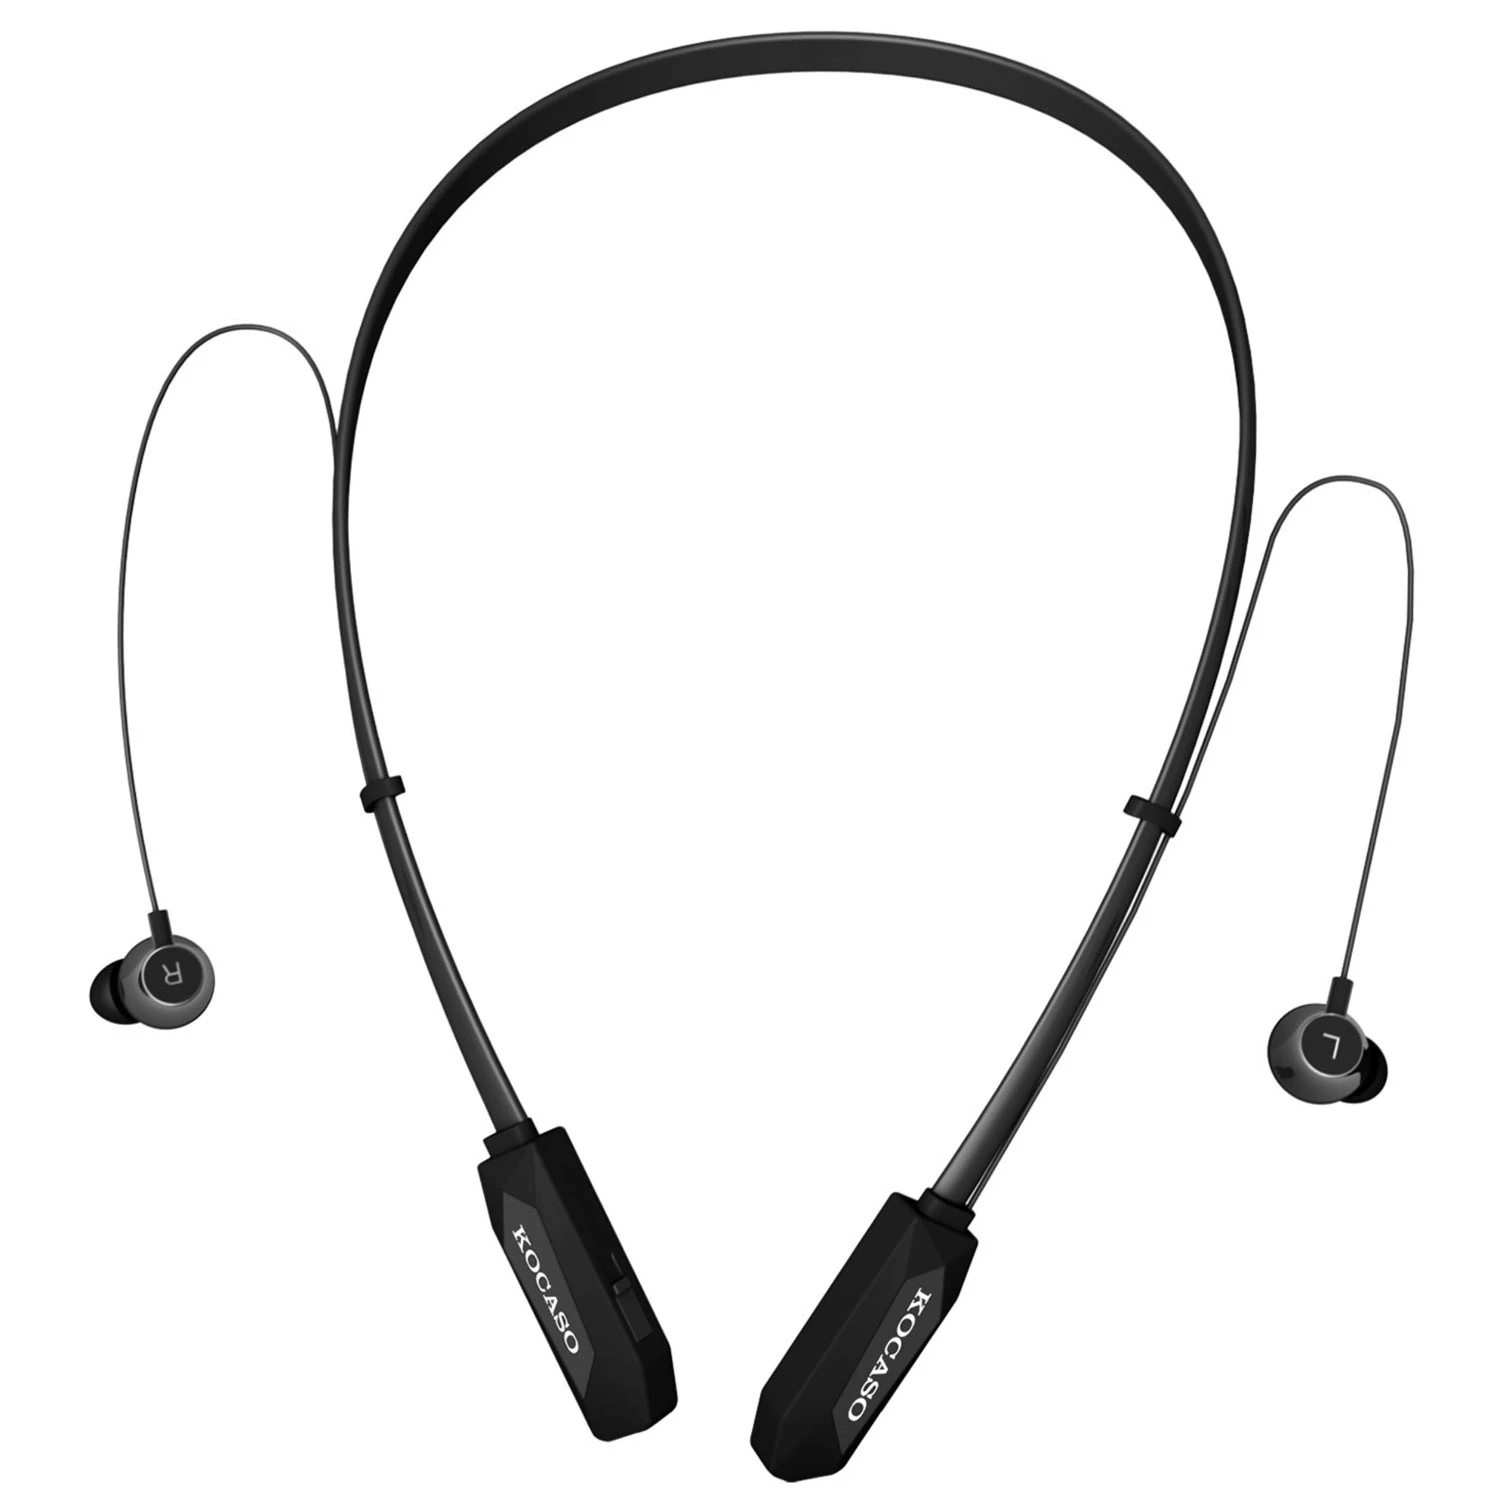 15Hrs Wireless Neckband Headphones - Sweat-proof Sport Earbuds with Deep Bass, Mic - In-Ear Magnetic